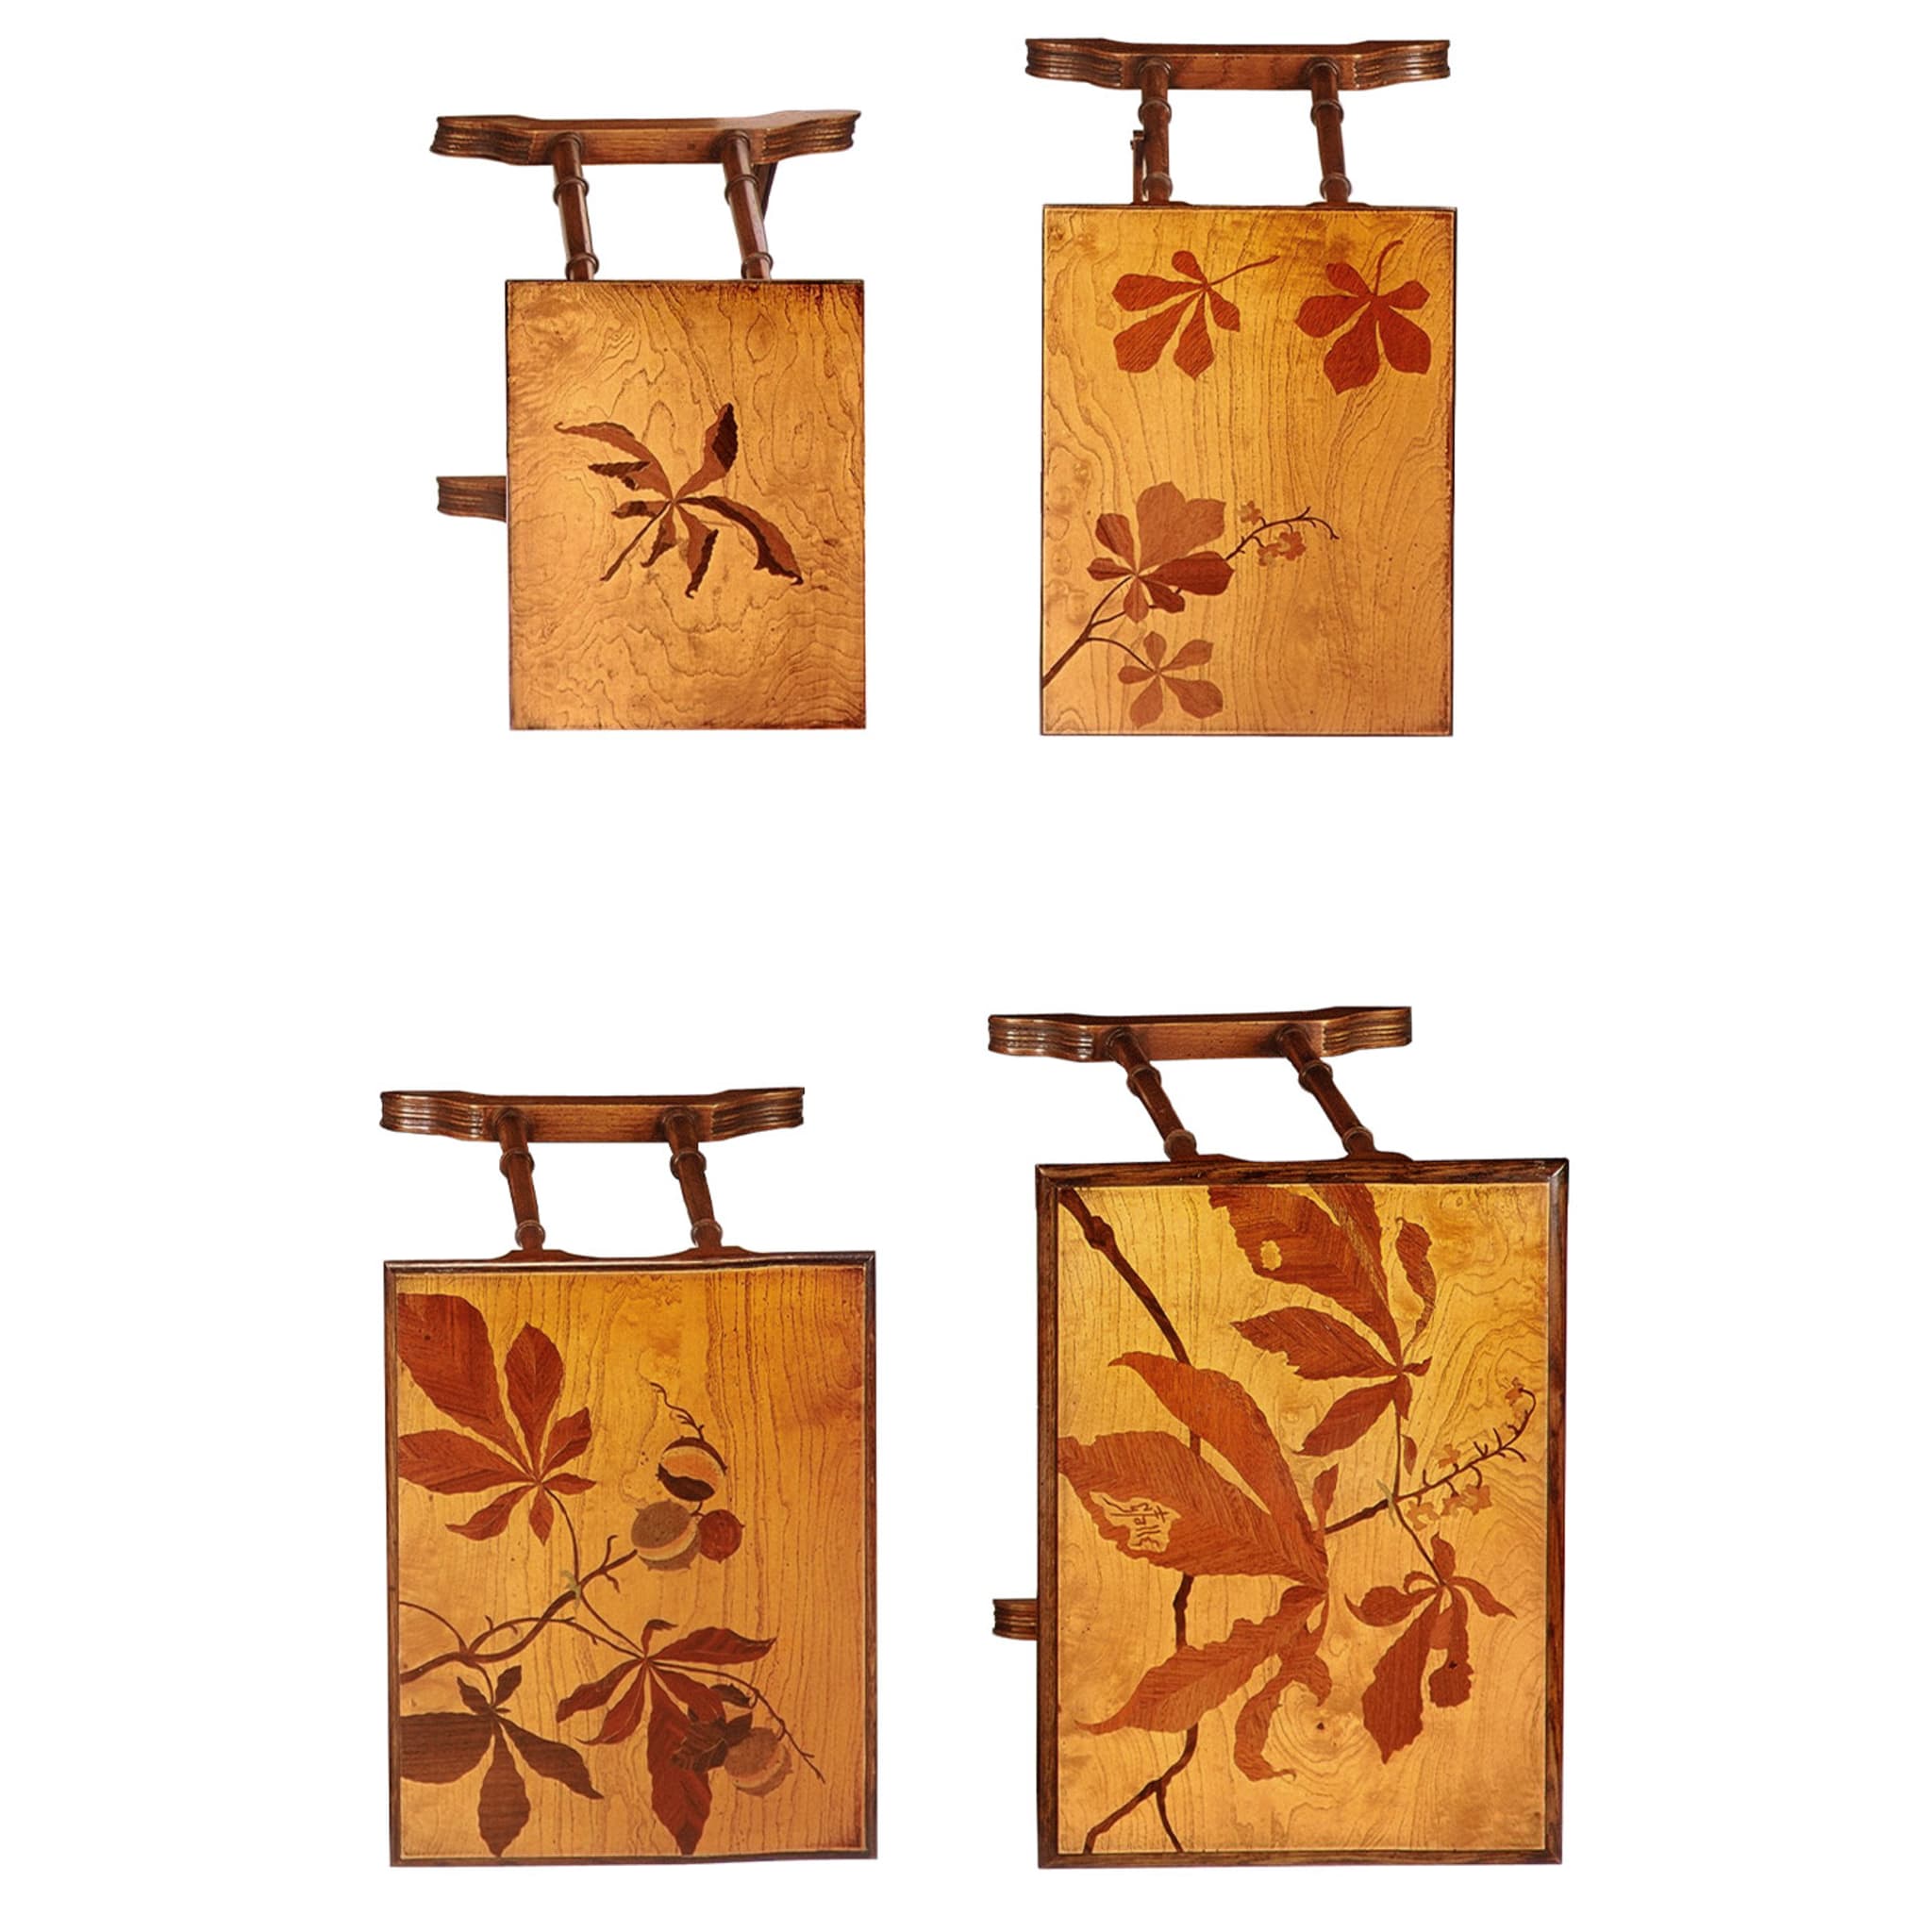 Set of 4 Inlaid Nesting Tables by Emile Gallè - Alternative view 1